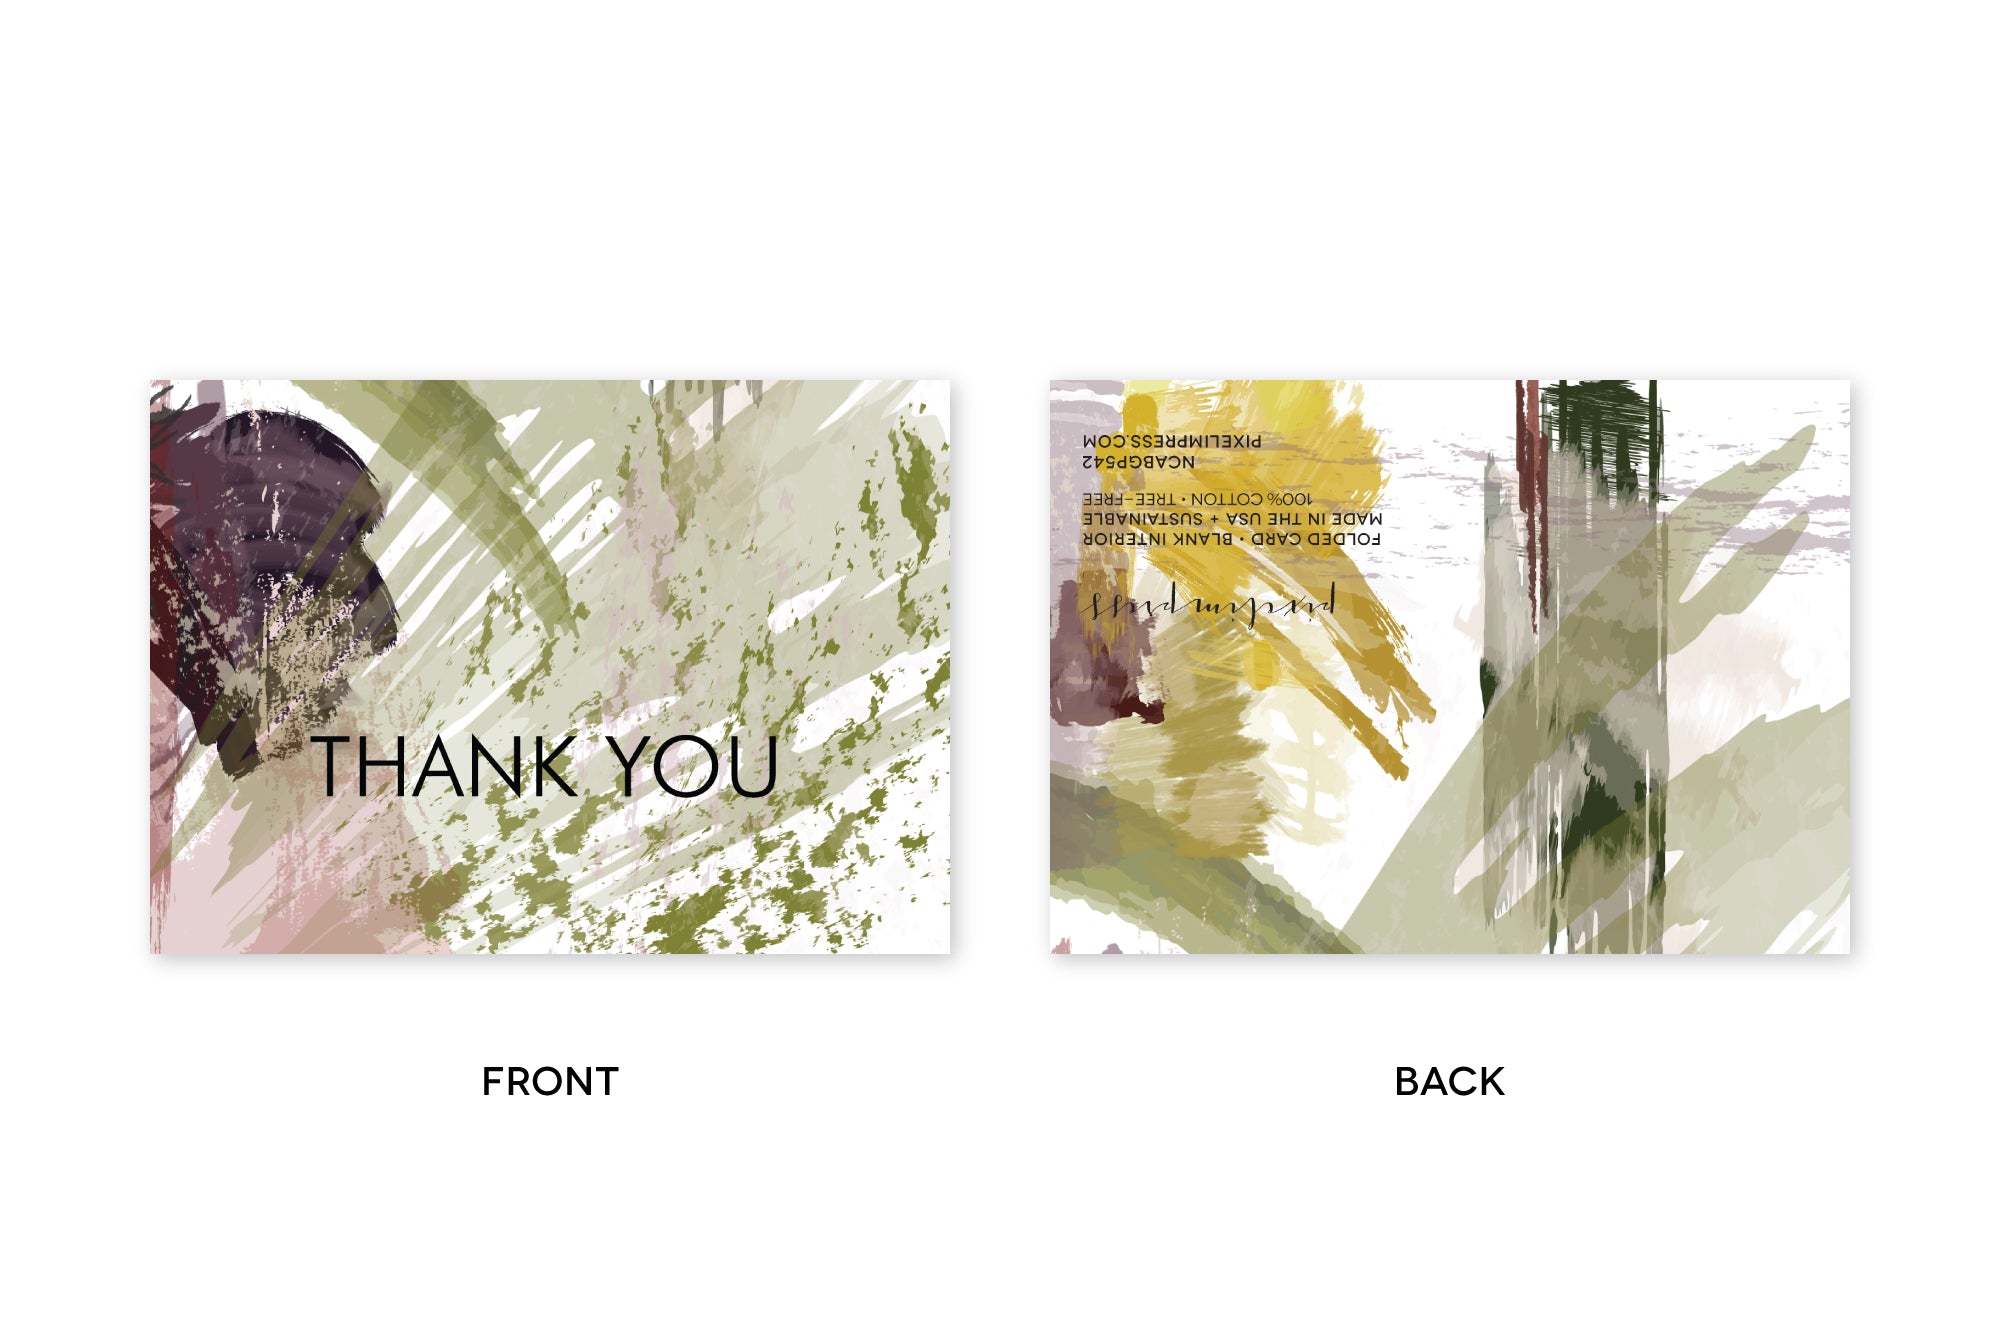 THANK YOU Green Plum Abstract Notecards